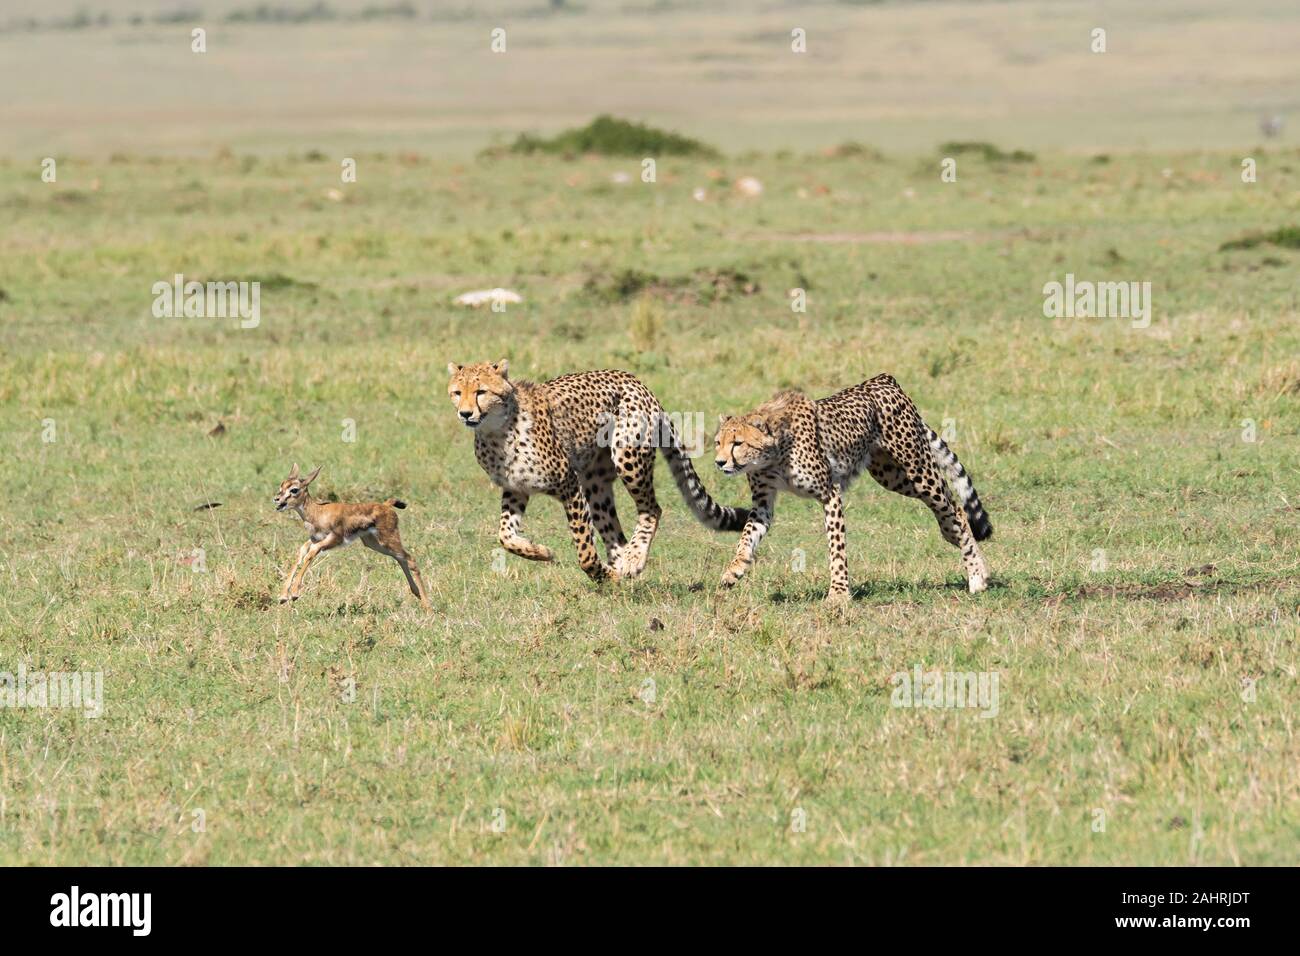 Page 3 - Cheetah Gazelle Resolution Stock Images - Alamy